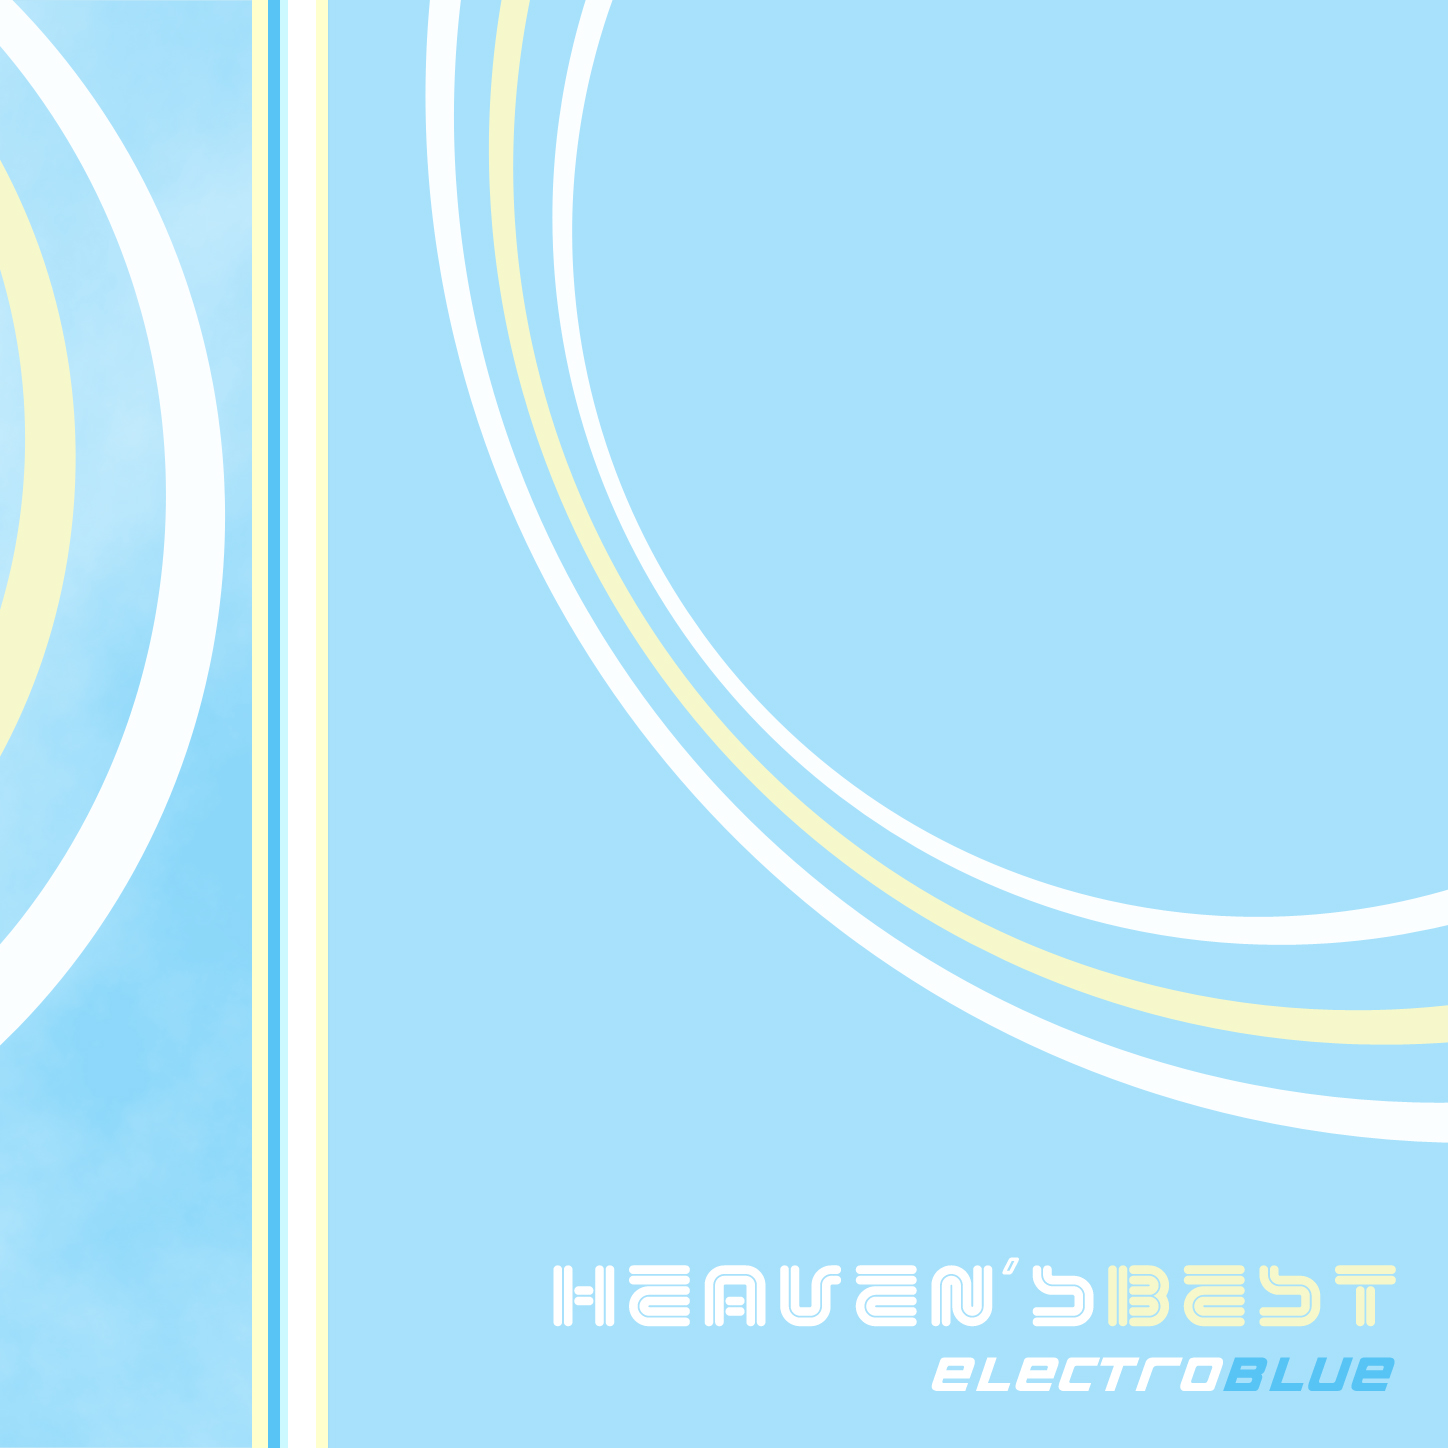 Heaven's Best CD cover art for Electro Blue's new CD available on CDbaby and iTunes !